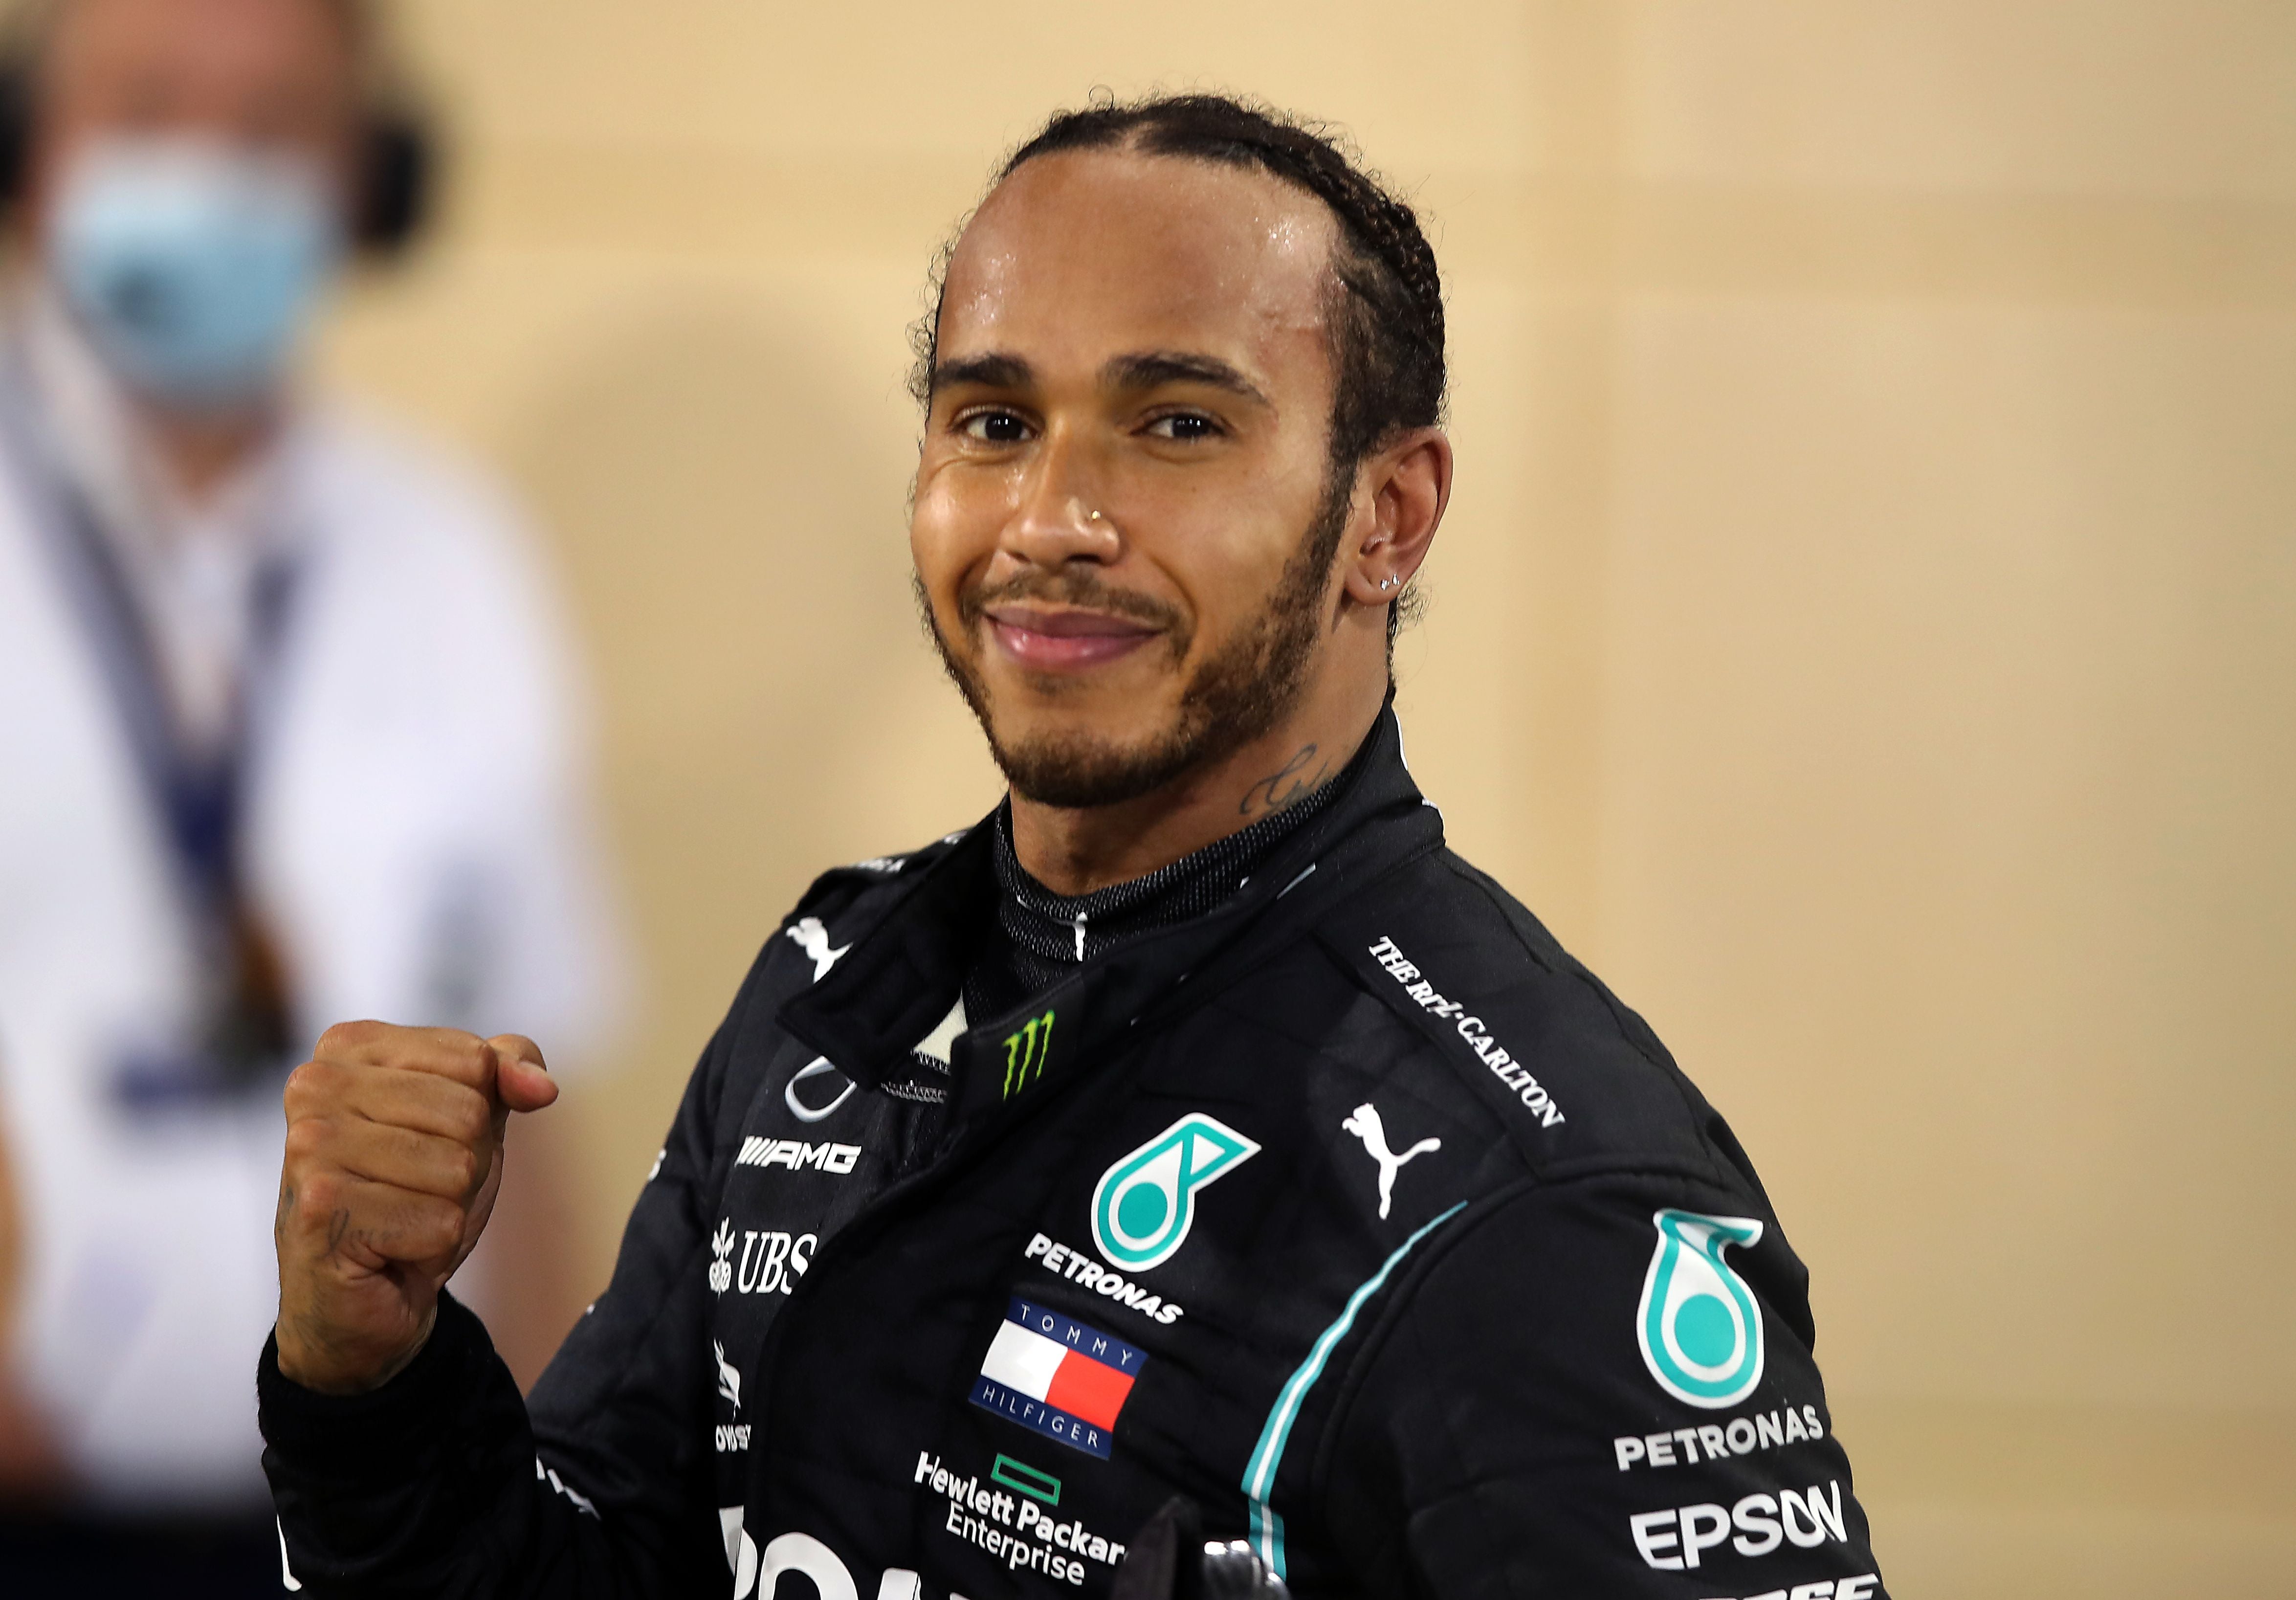 Sir Lewis Hamilton says change is still needed within F1 as he reaffirms intent to fight for equality The Independent pic pic